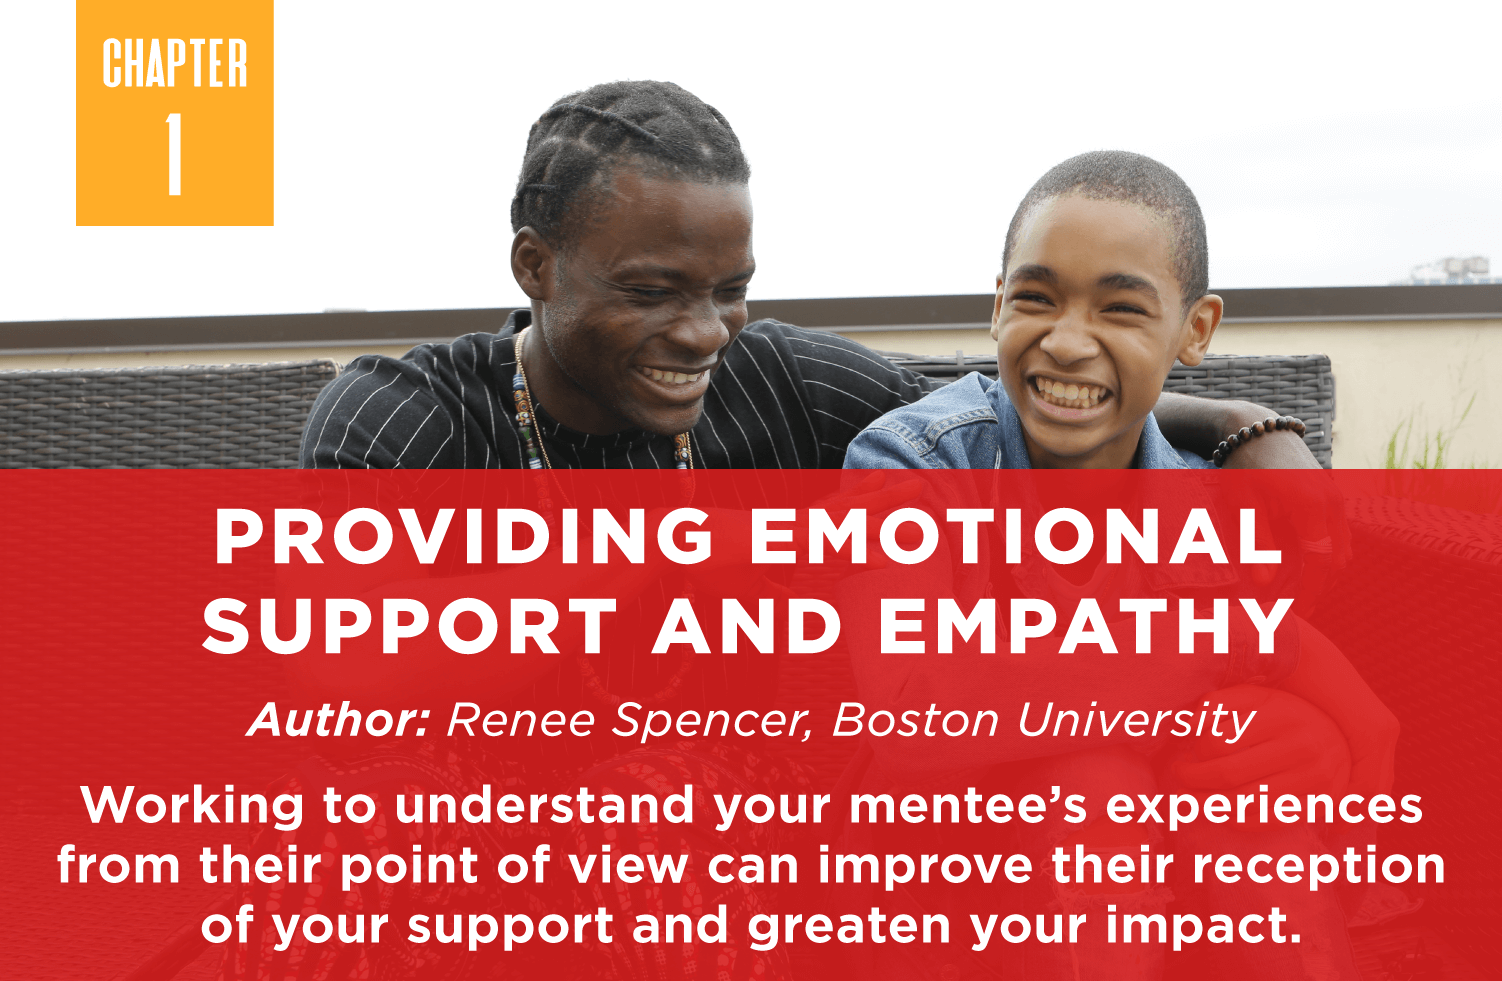 Providing Emotional
Support and Empathy

Author: Renee Spencer, Boston University

Working to understand your mentee’s experiences from their point of view can improve their reception of your support and greaten your impact.